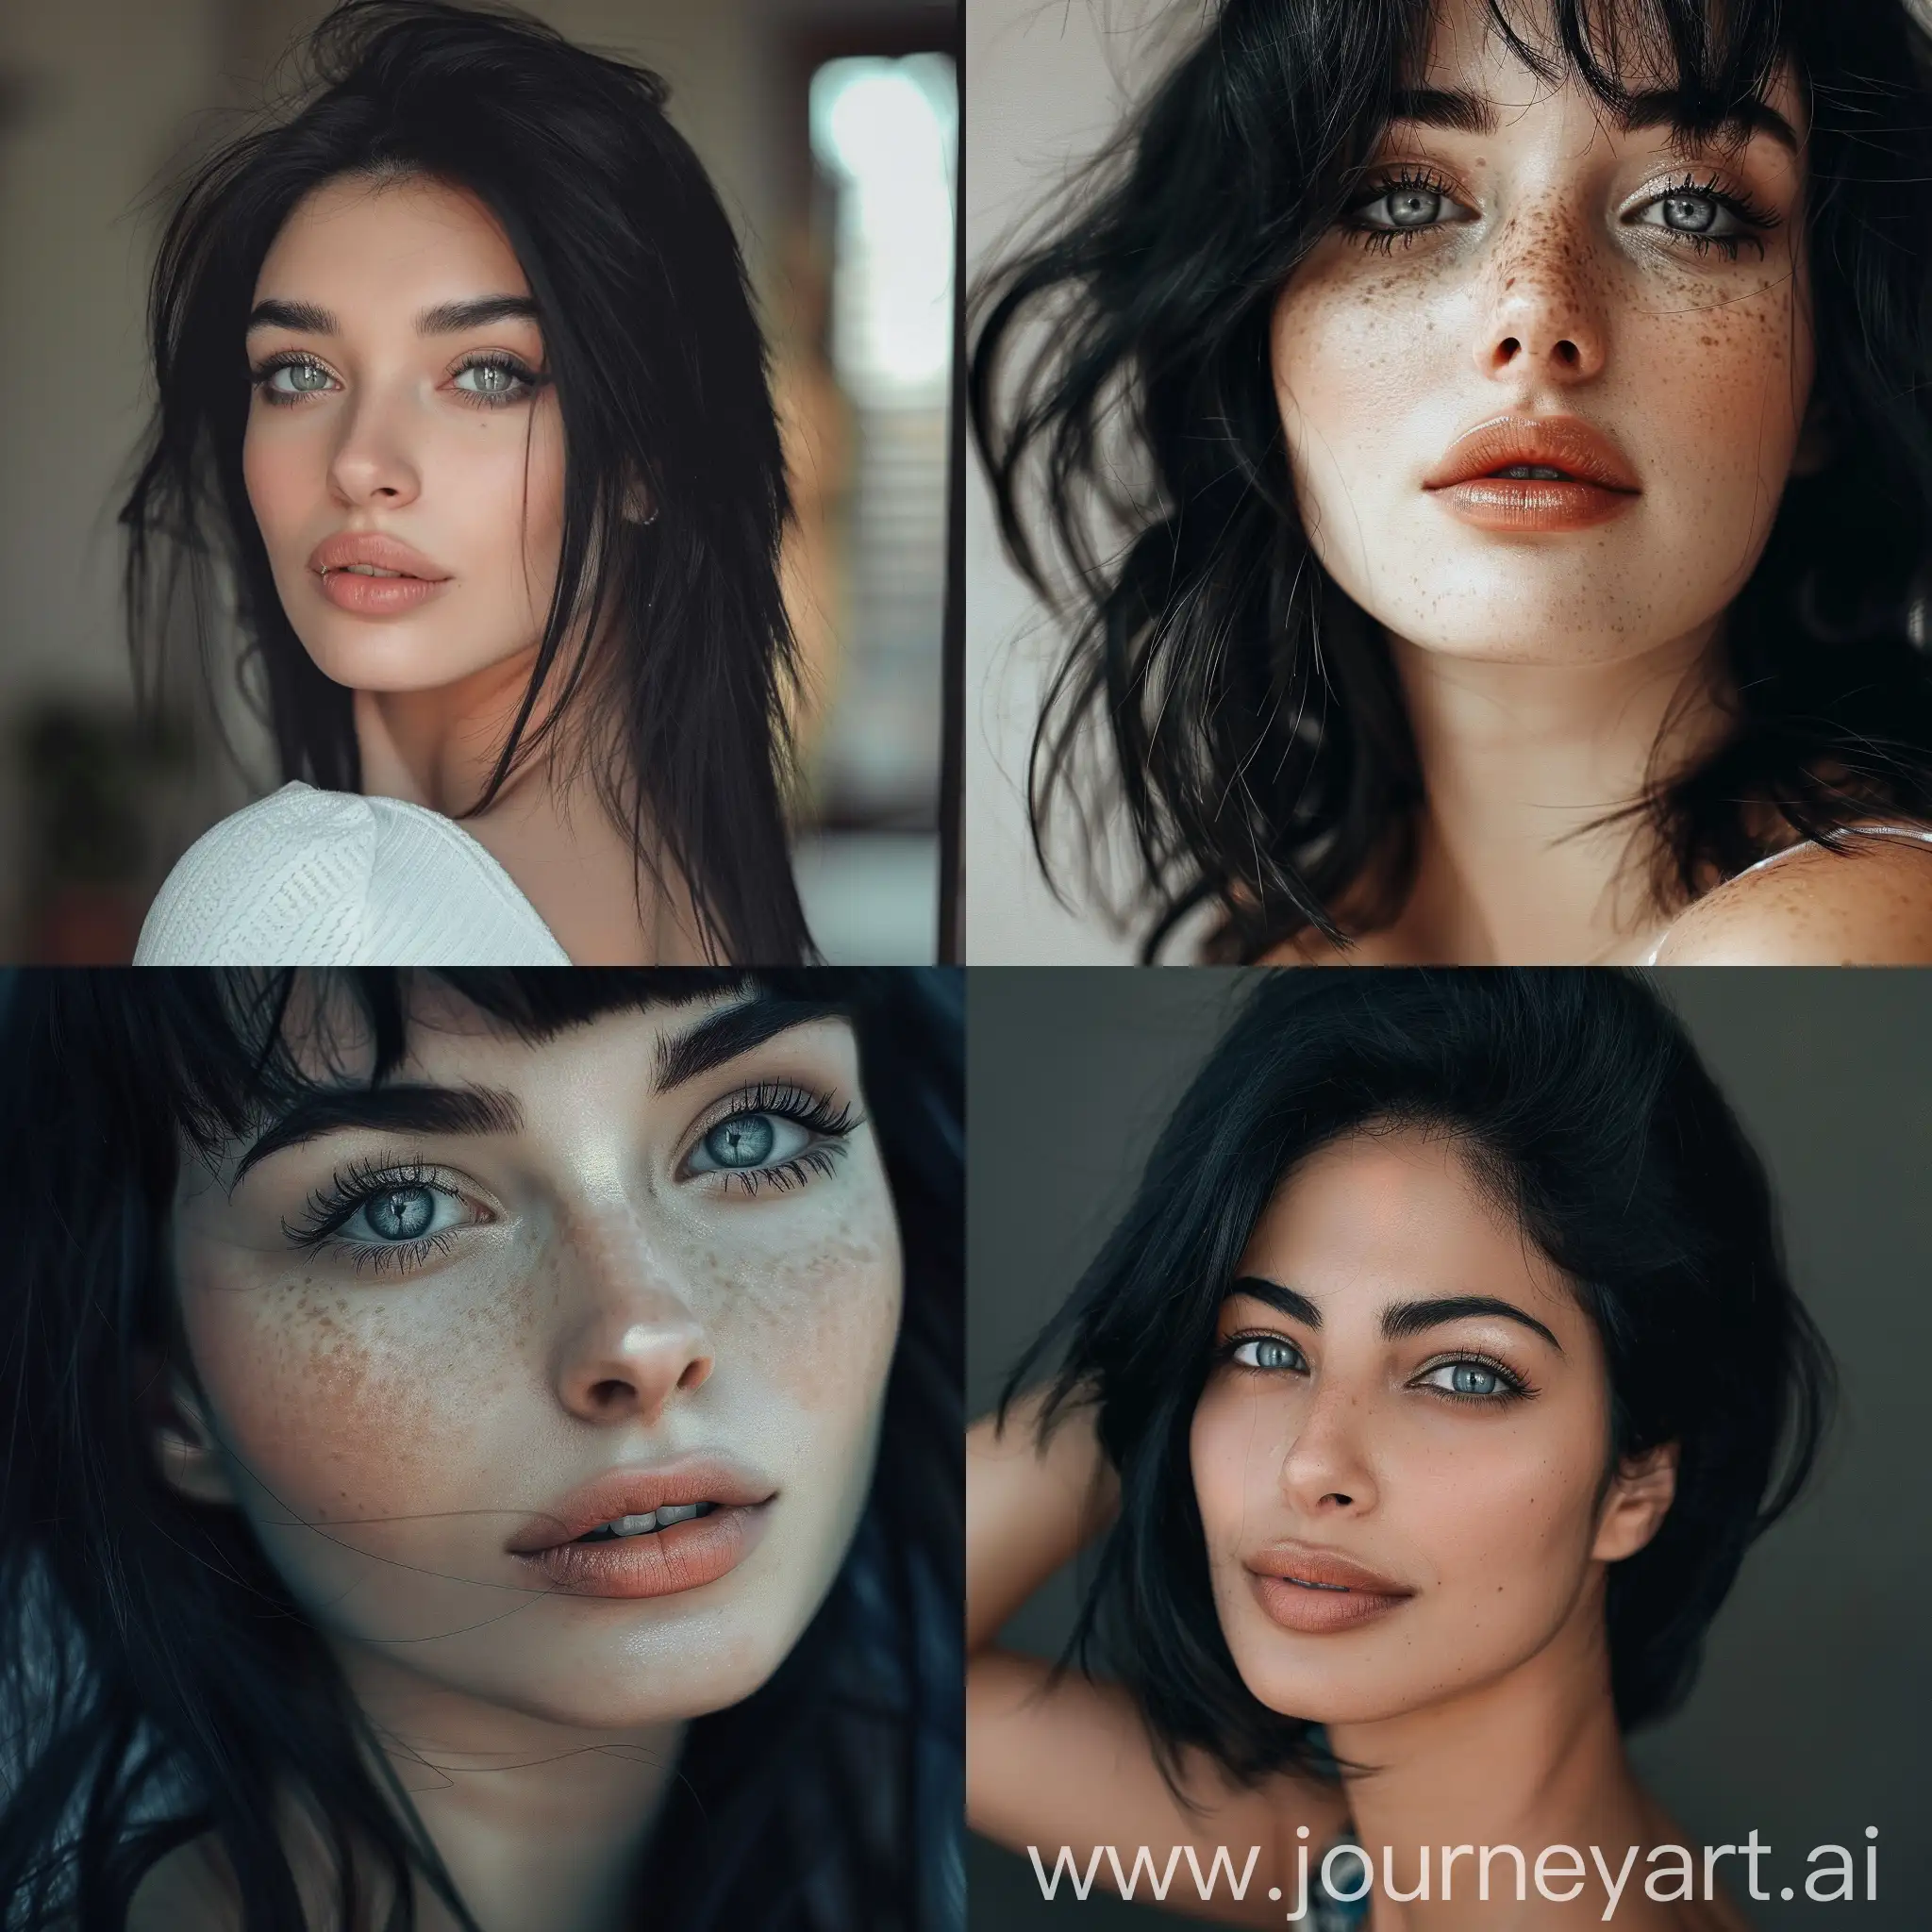 Portrait-of-a-Beautiful-Woman-with-Black-Hair-and-Grey-Eyes